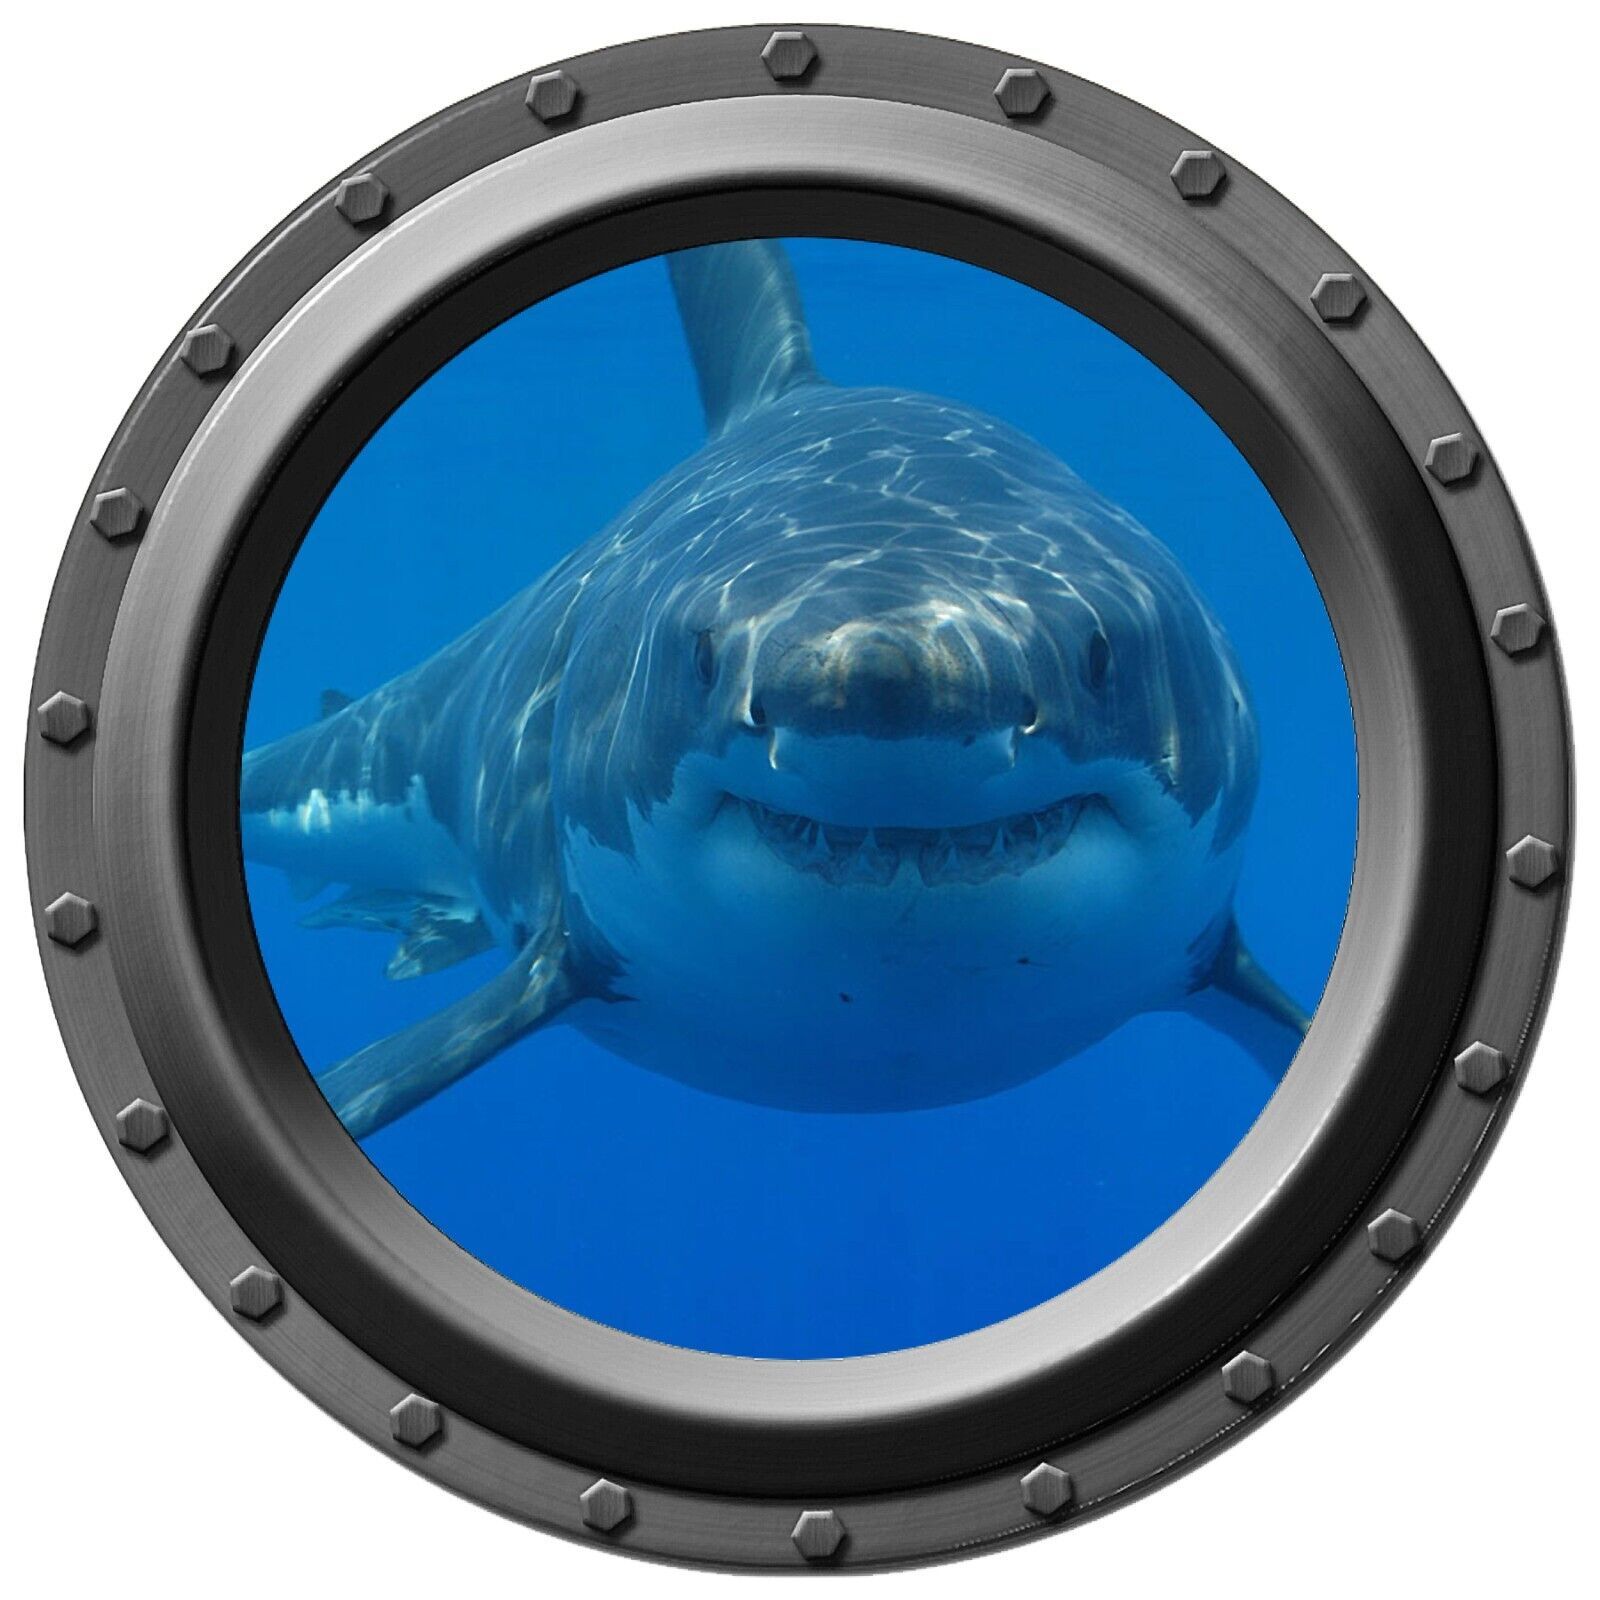 Large Hungry Shark Watches You Porthole Wall Decal - £2.34 GBP - £32.85 GBP